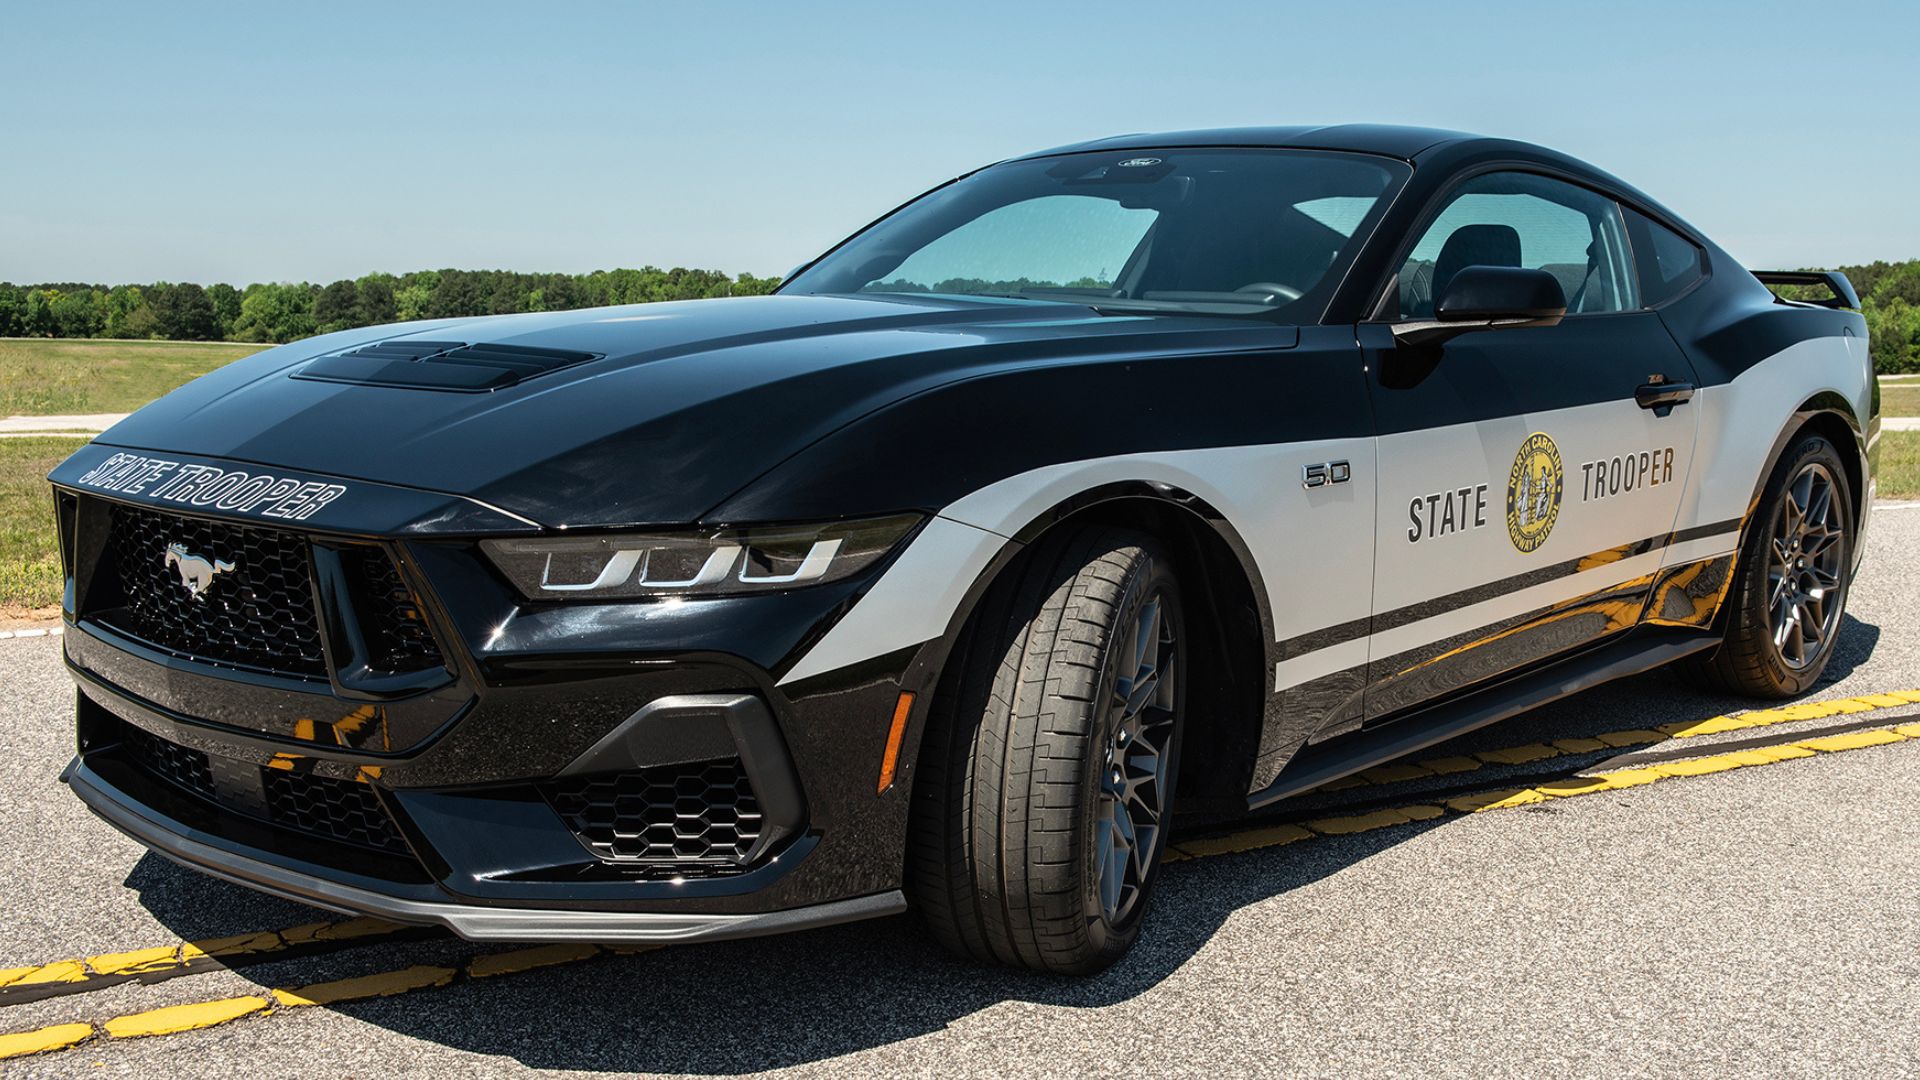 Ford Mustang GTs Join Noth Carolina State Highway Patrol